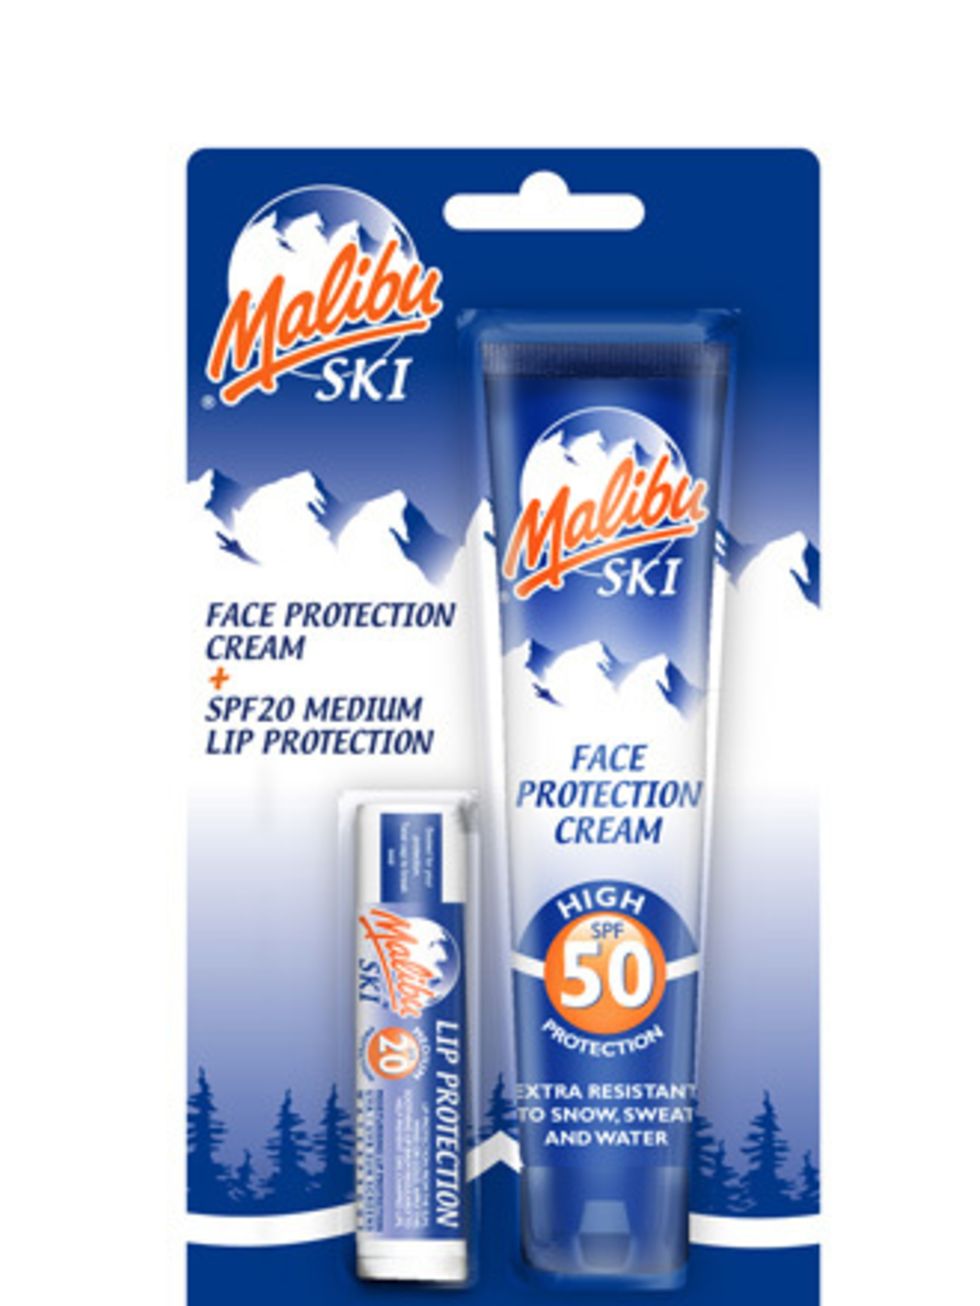 <p>Pop this high factor mini face cream and lip balm in your pocket. It will come in useful if you start to feel the burn mid ski.Face Protection Cream + Lip Protection SPF 50, £3.99 by <a href="http://www.malibusun.com/product.aspx?catid=50">Malibu</a></